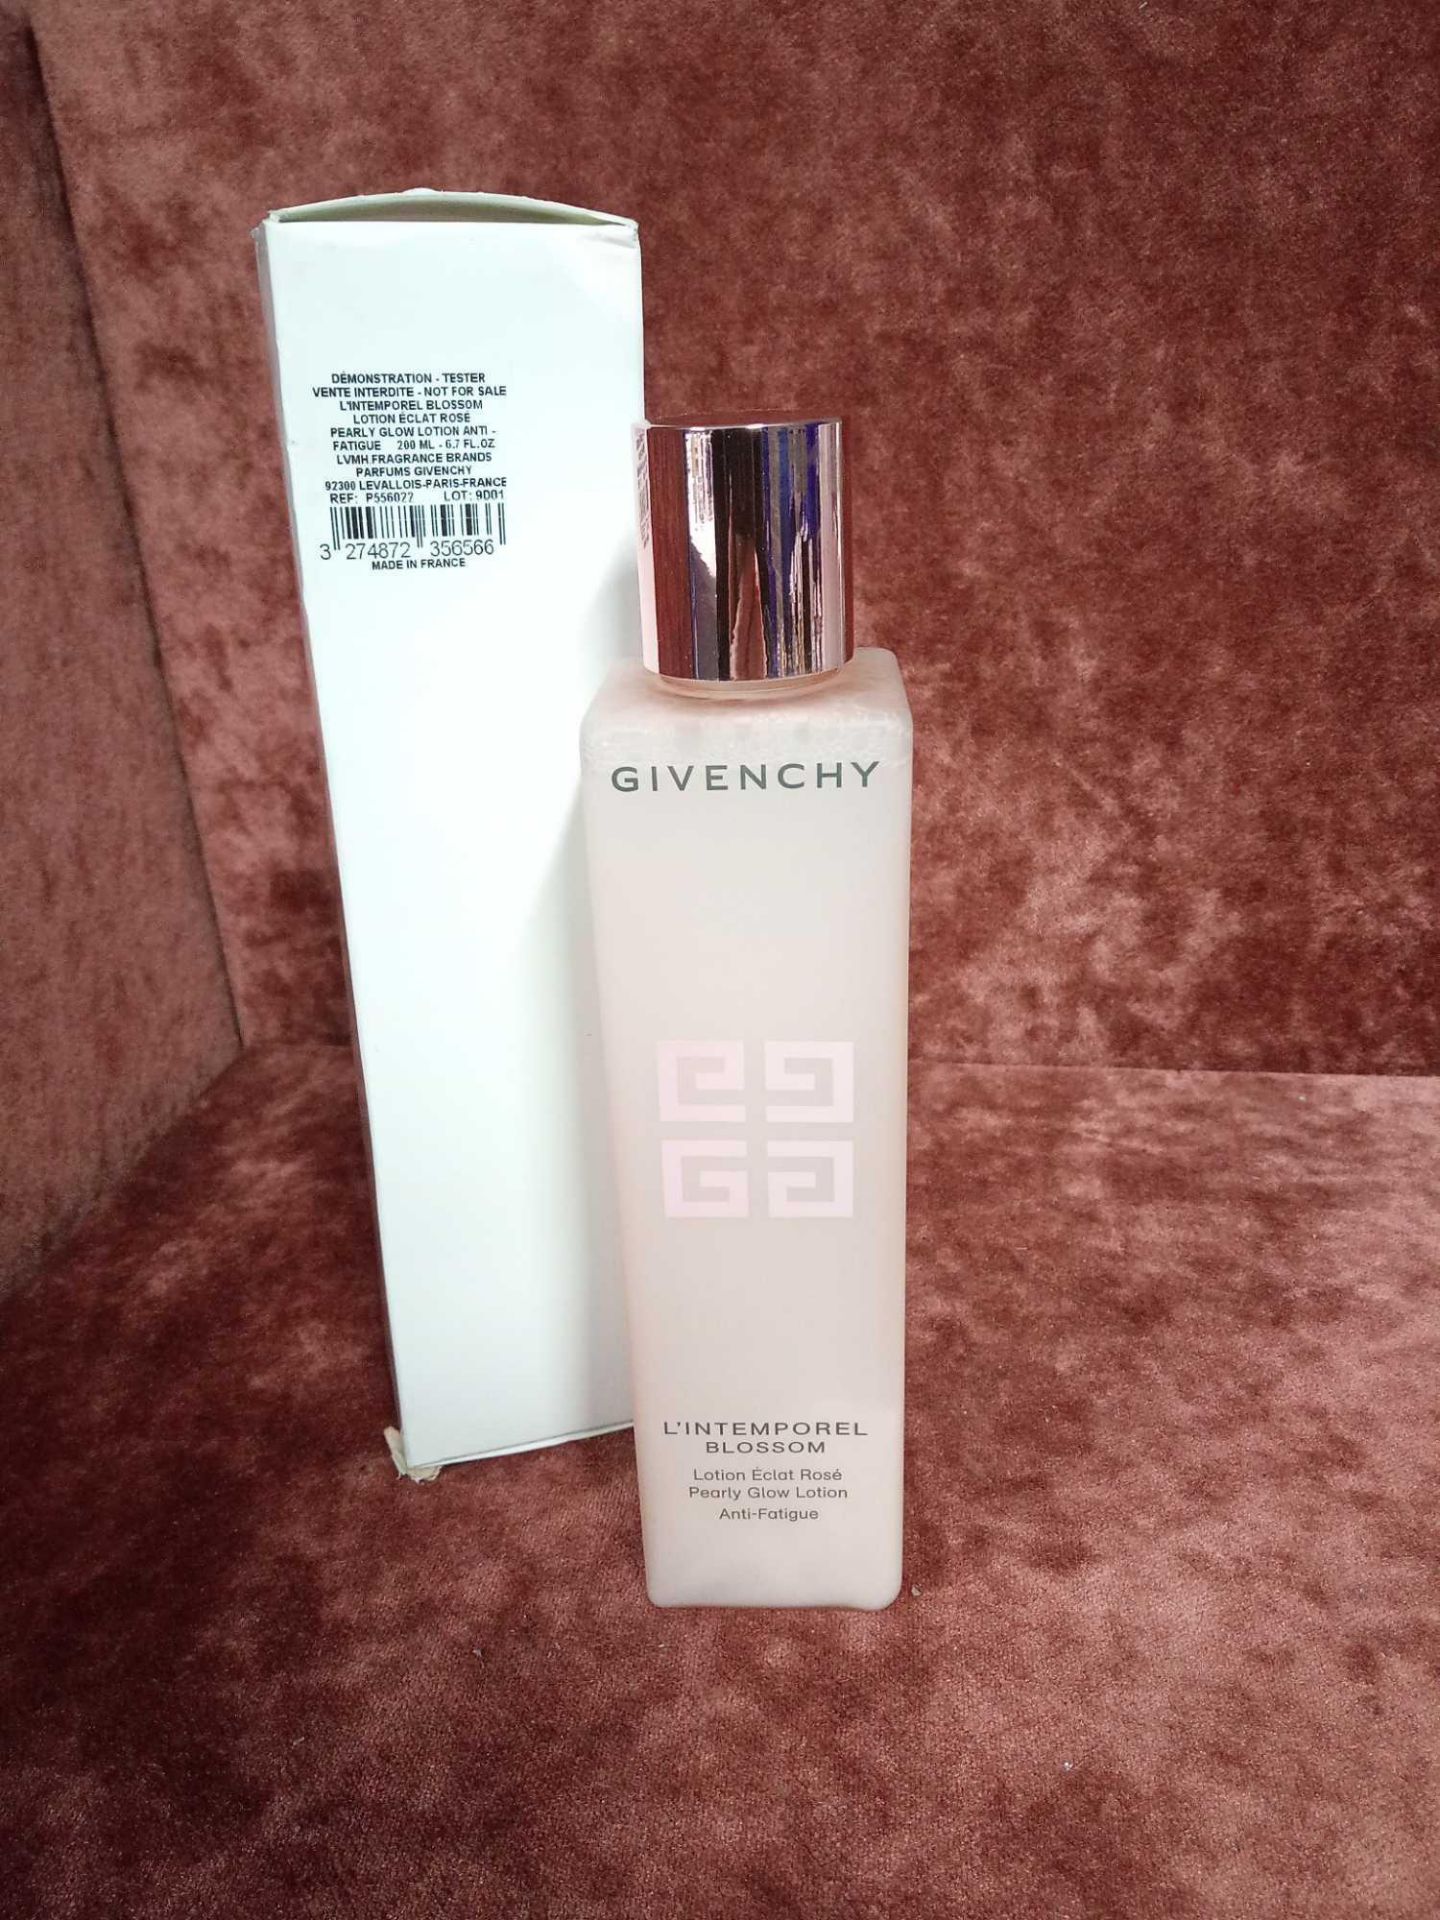 RRP £50 Brand New Boxed Unused Tester Of Givenchy L'Intemporel Blossom Anti Fatigue Pearly Glow Loti